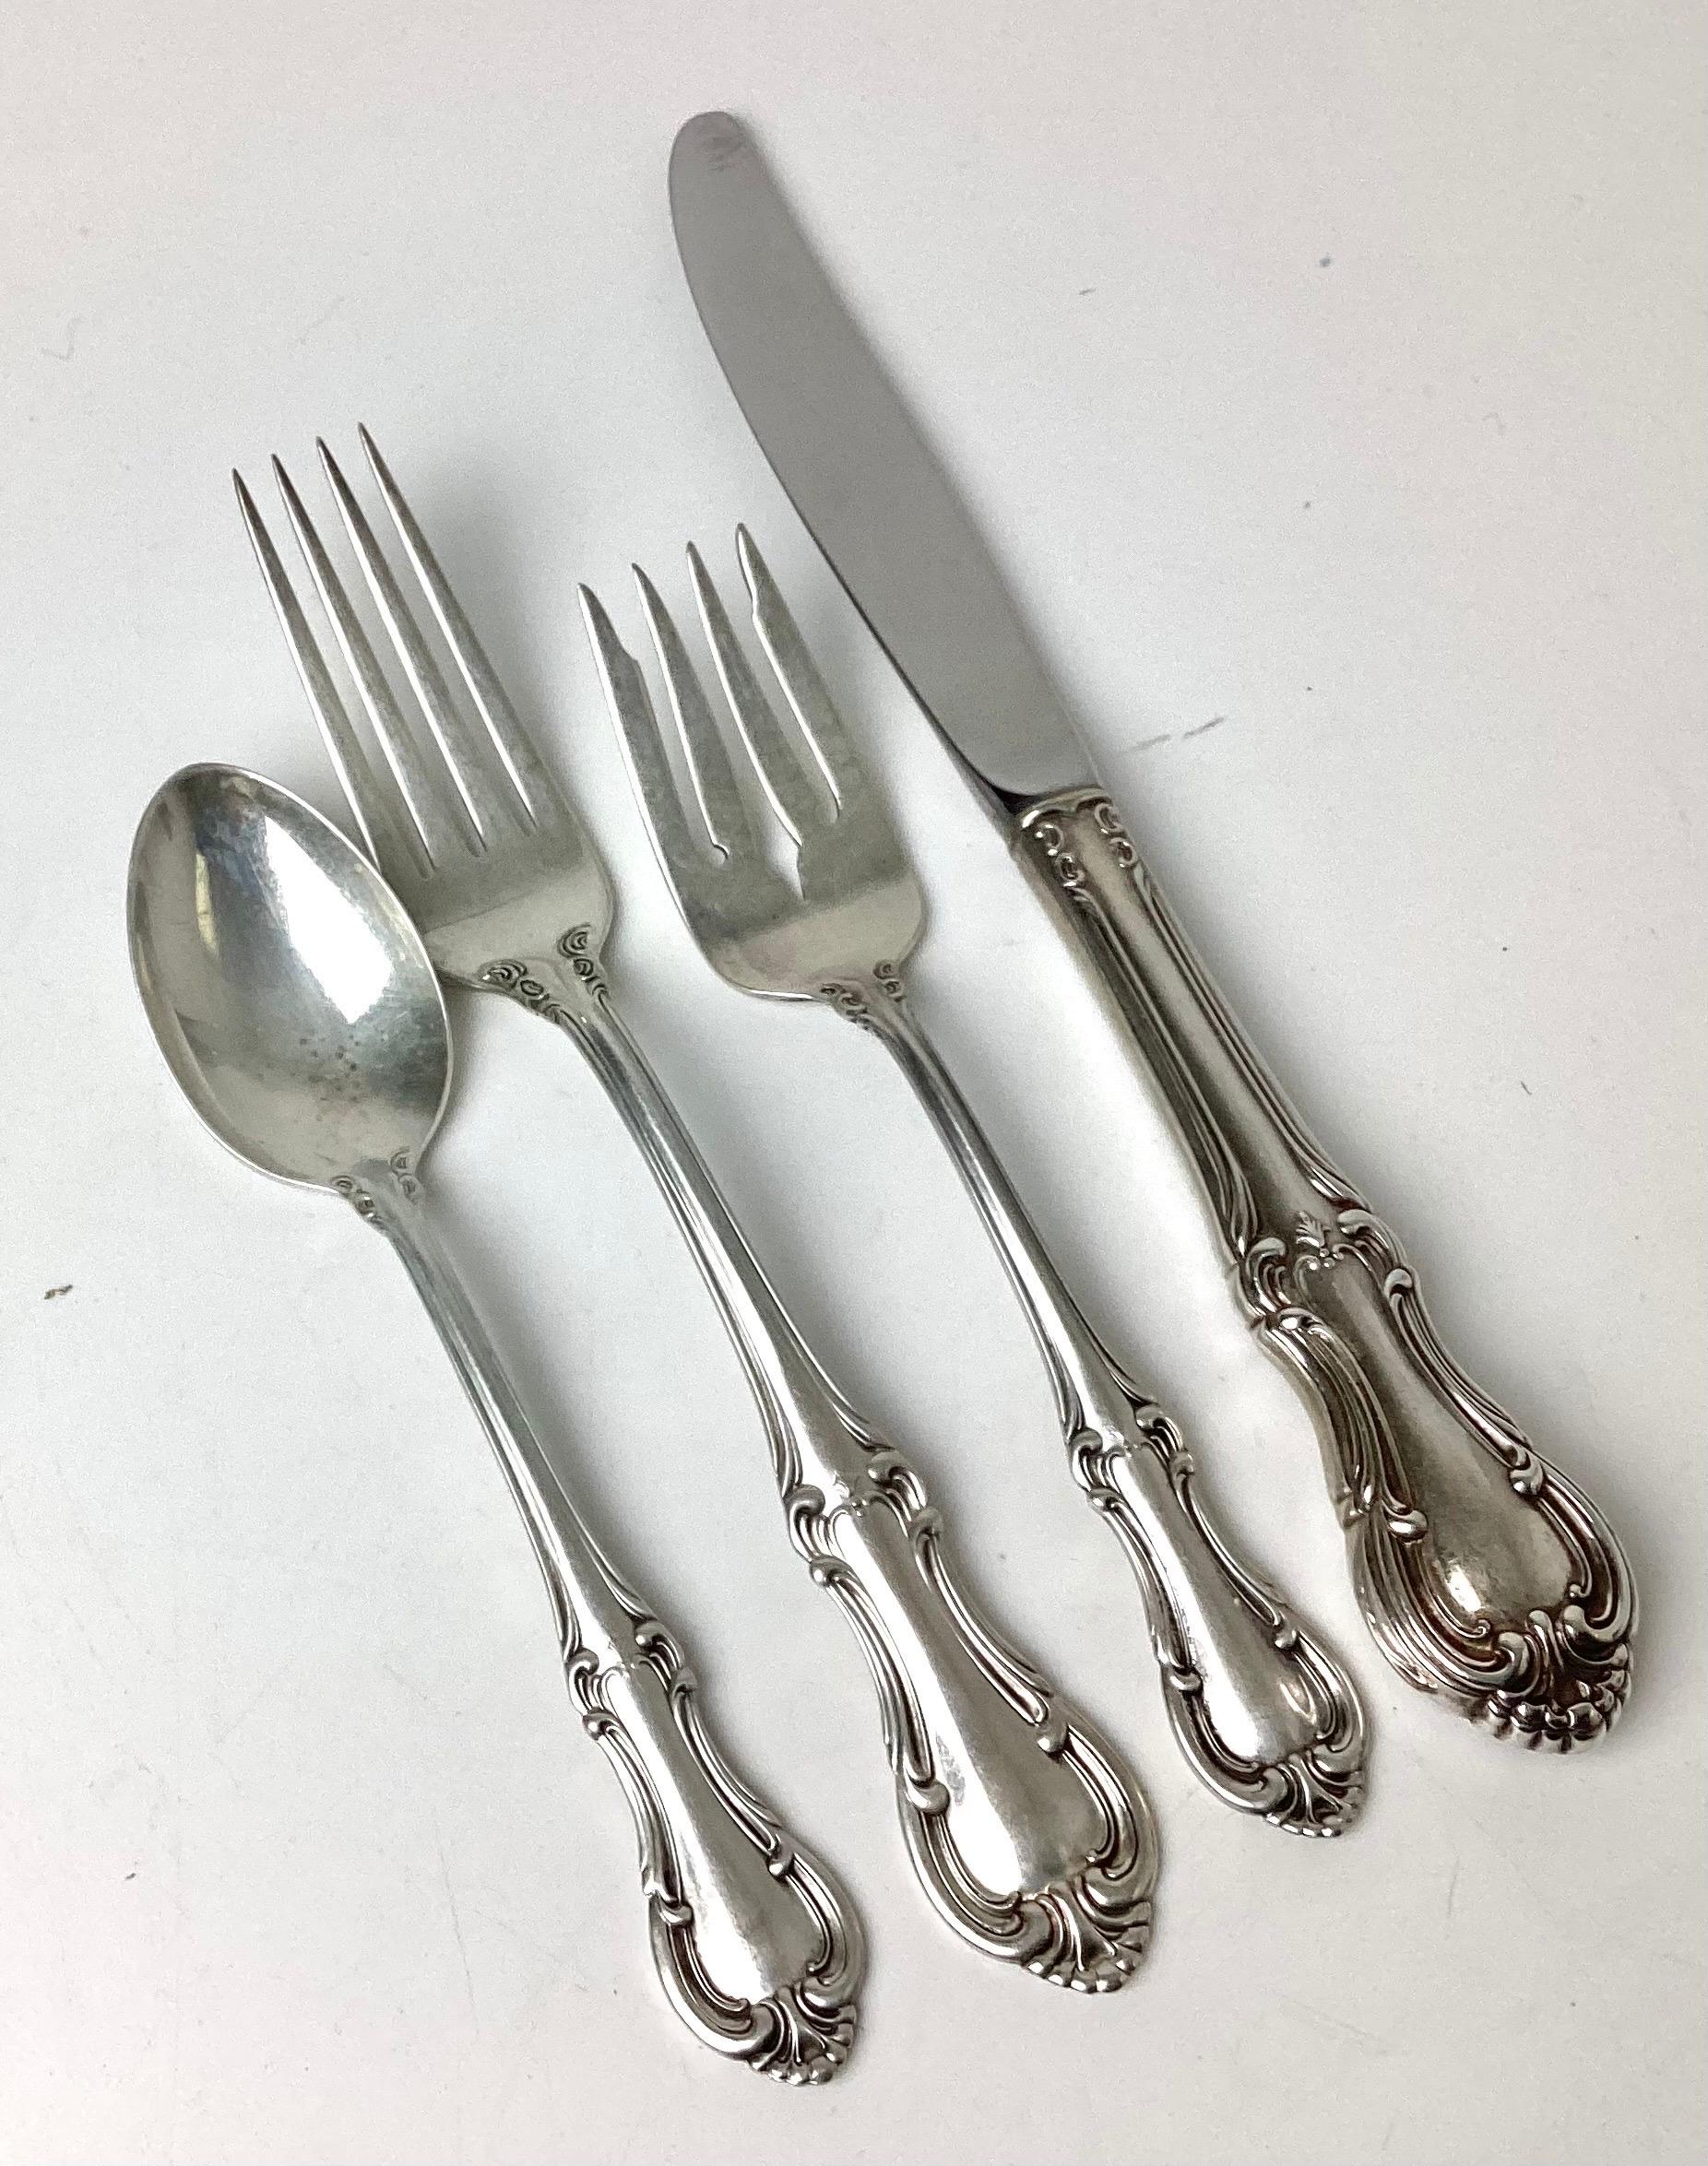 This was my mothers et bought in the early 1960's new as a wedding gift. It is a place setting for 12 with 8 serving pieces.
Dinner forks are 7 1/2